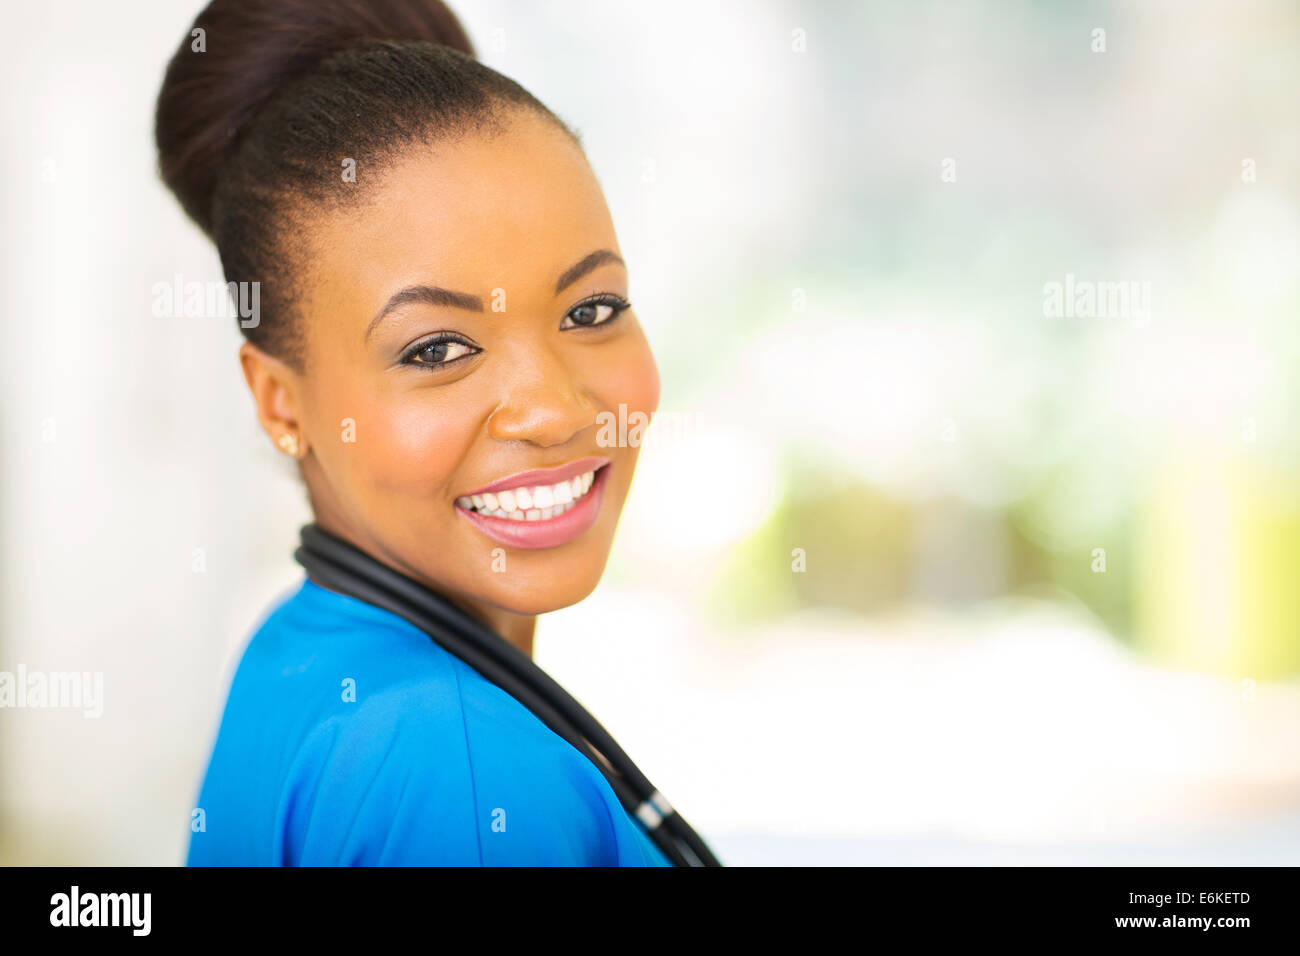 close up portrait of African female medical intern Stock Photo